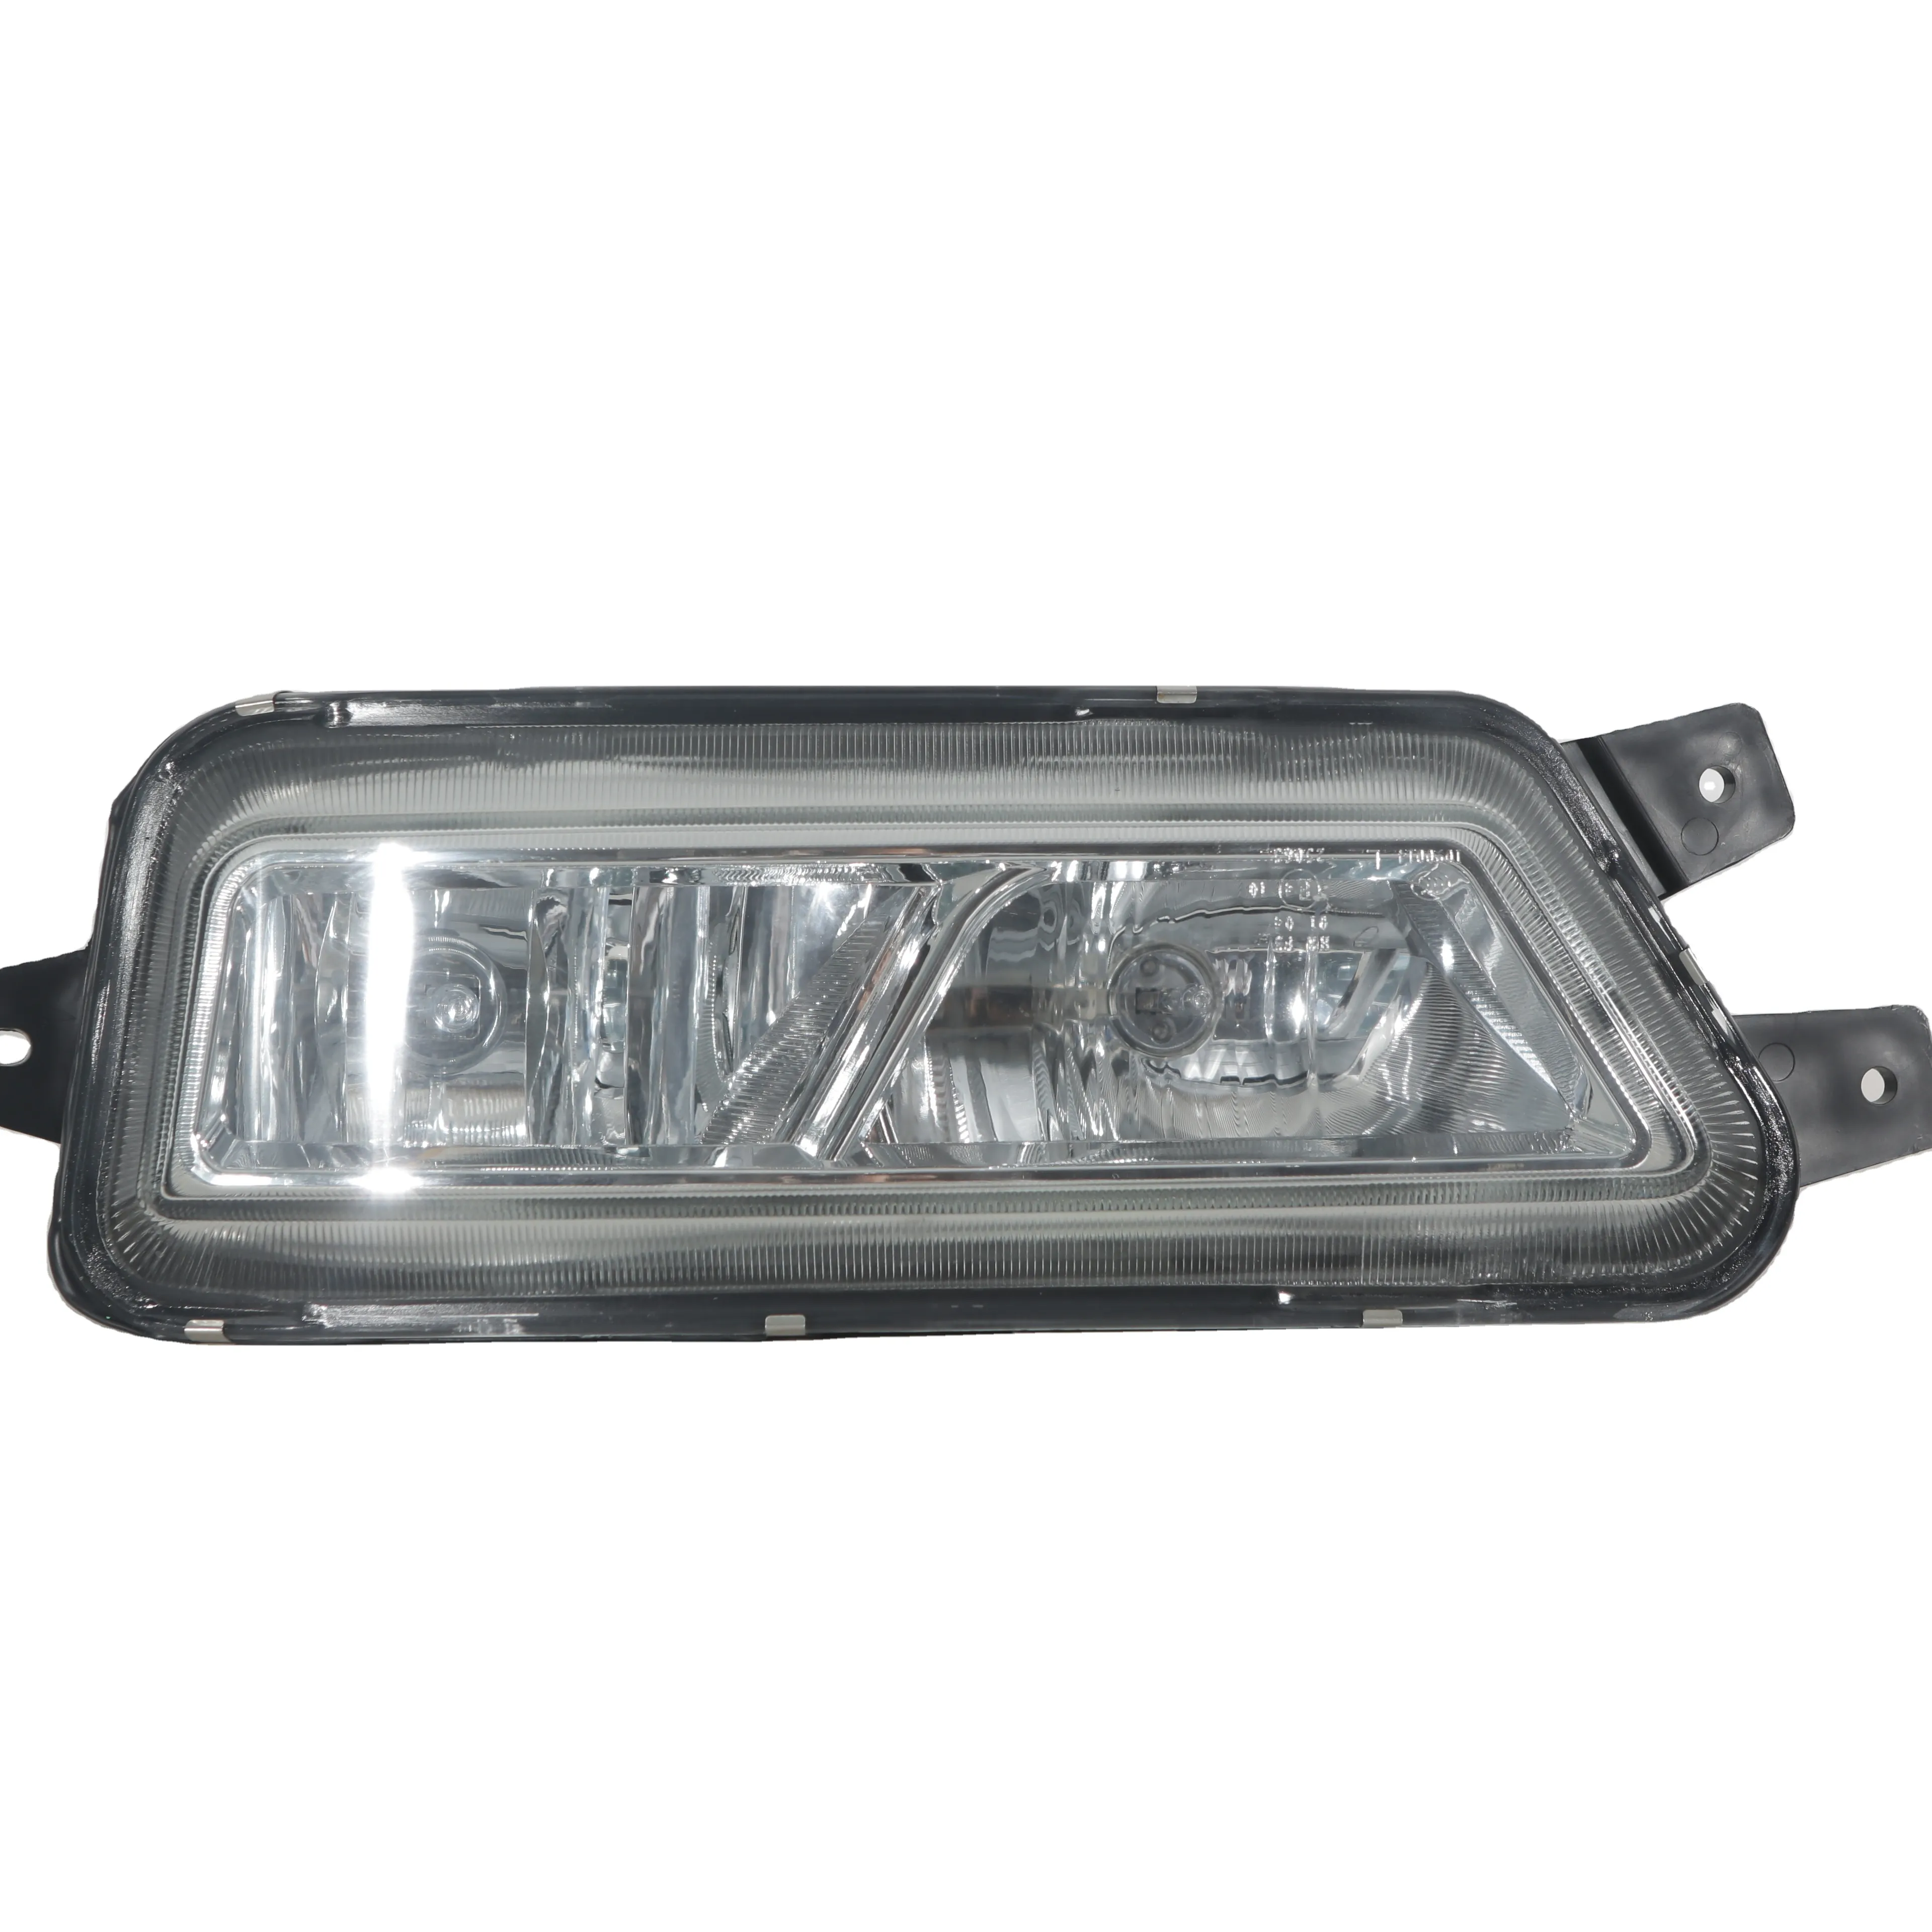 Ludebei Self-Produced JH6-1063 Front Fog Light for FAW Truck 41cm*91cm*21.6cm Dimensions Self-produced Driving Lights